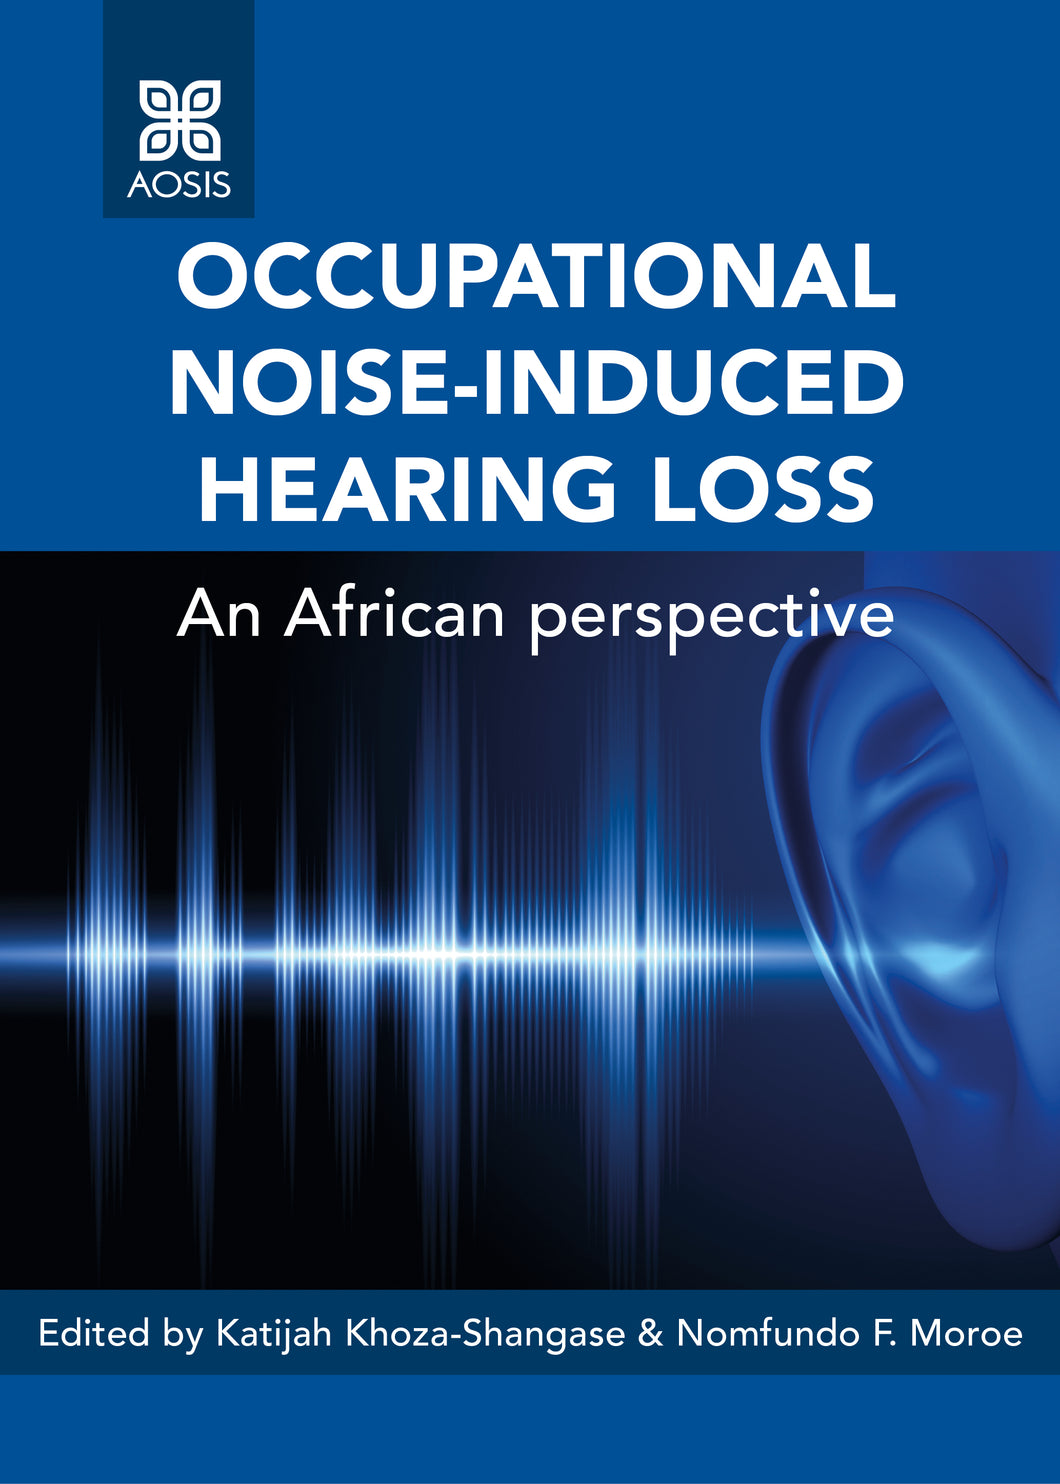 Occupational noise induced hearing loss: An African perspective